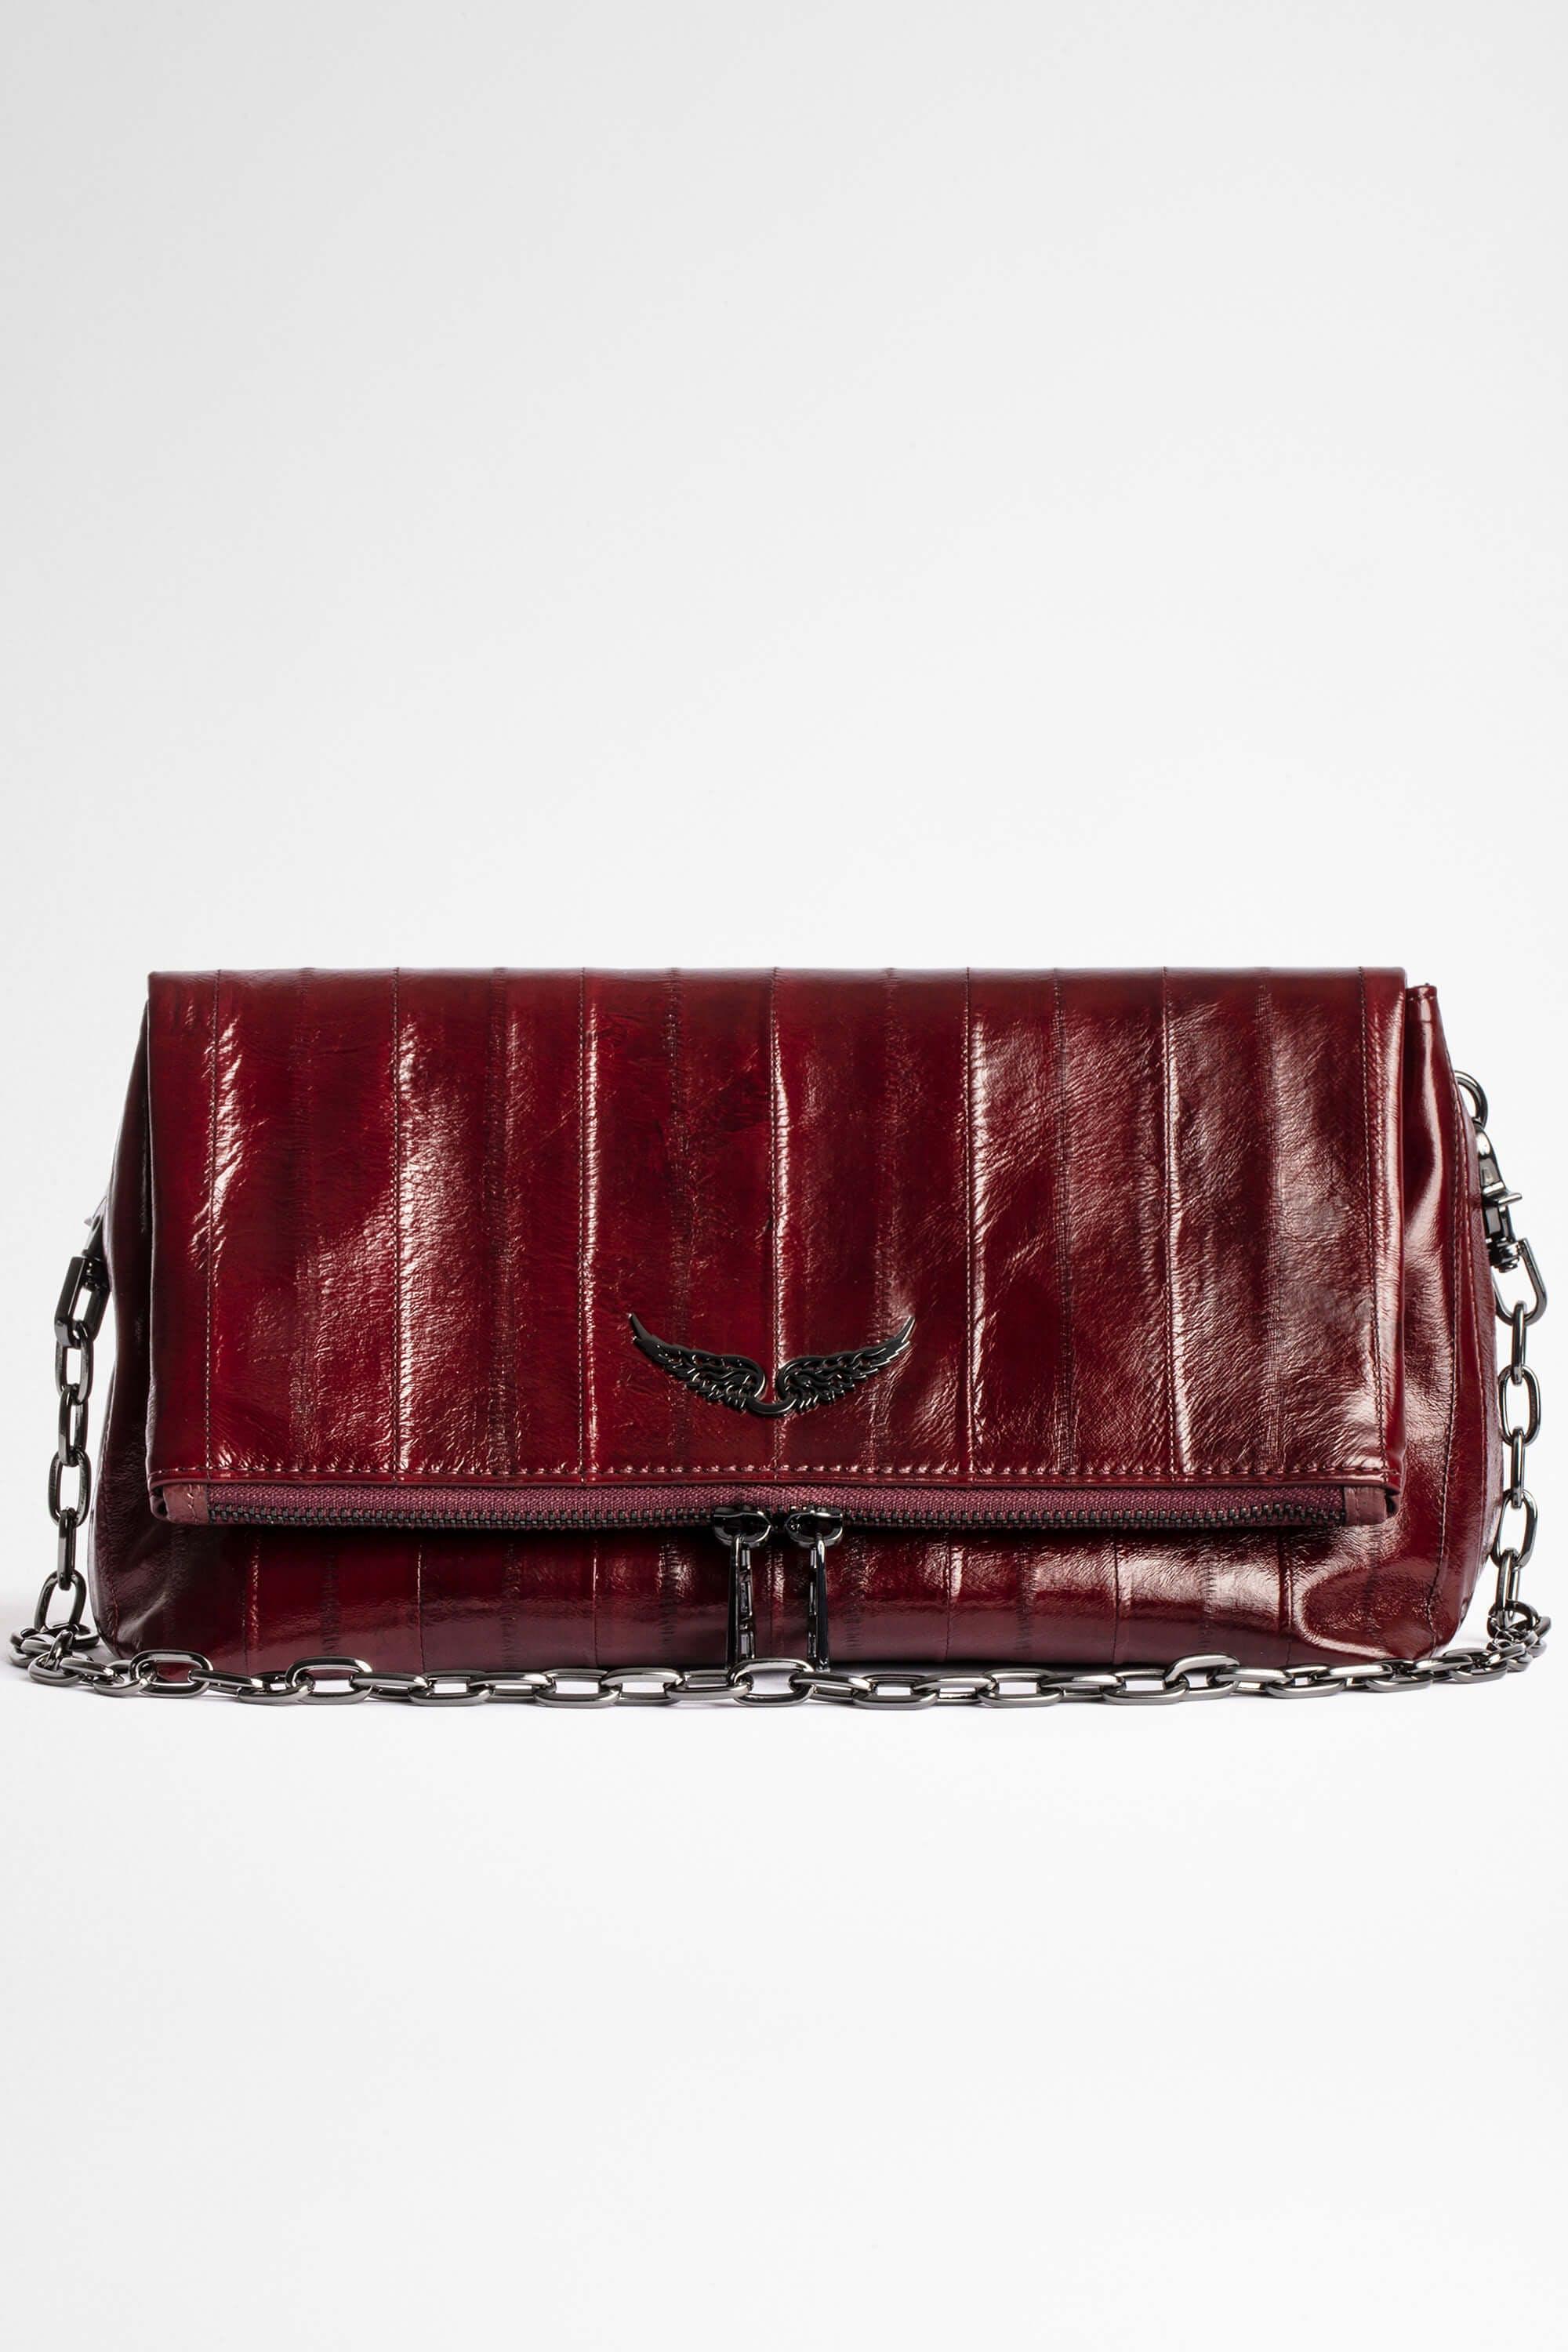 Zadig & Voltaire Rocky Shiny Clutch in Red - Lyst